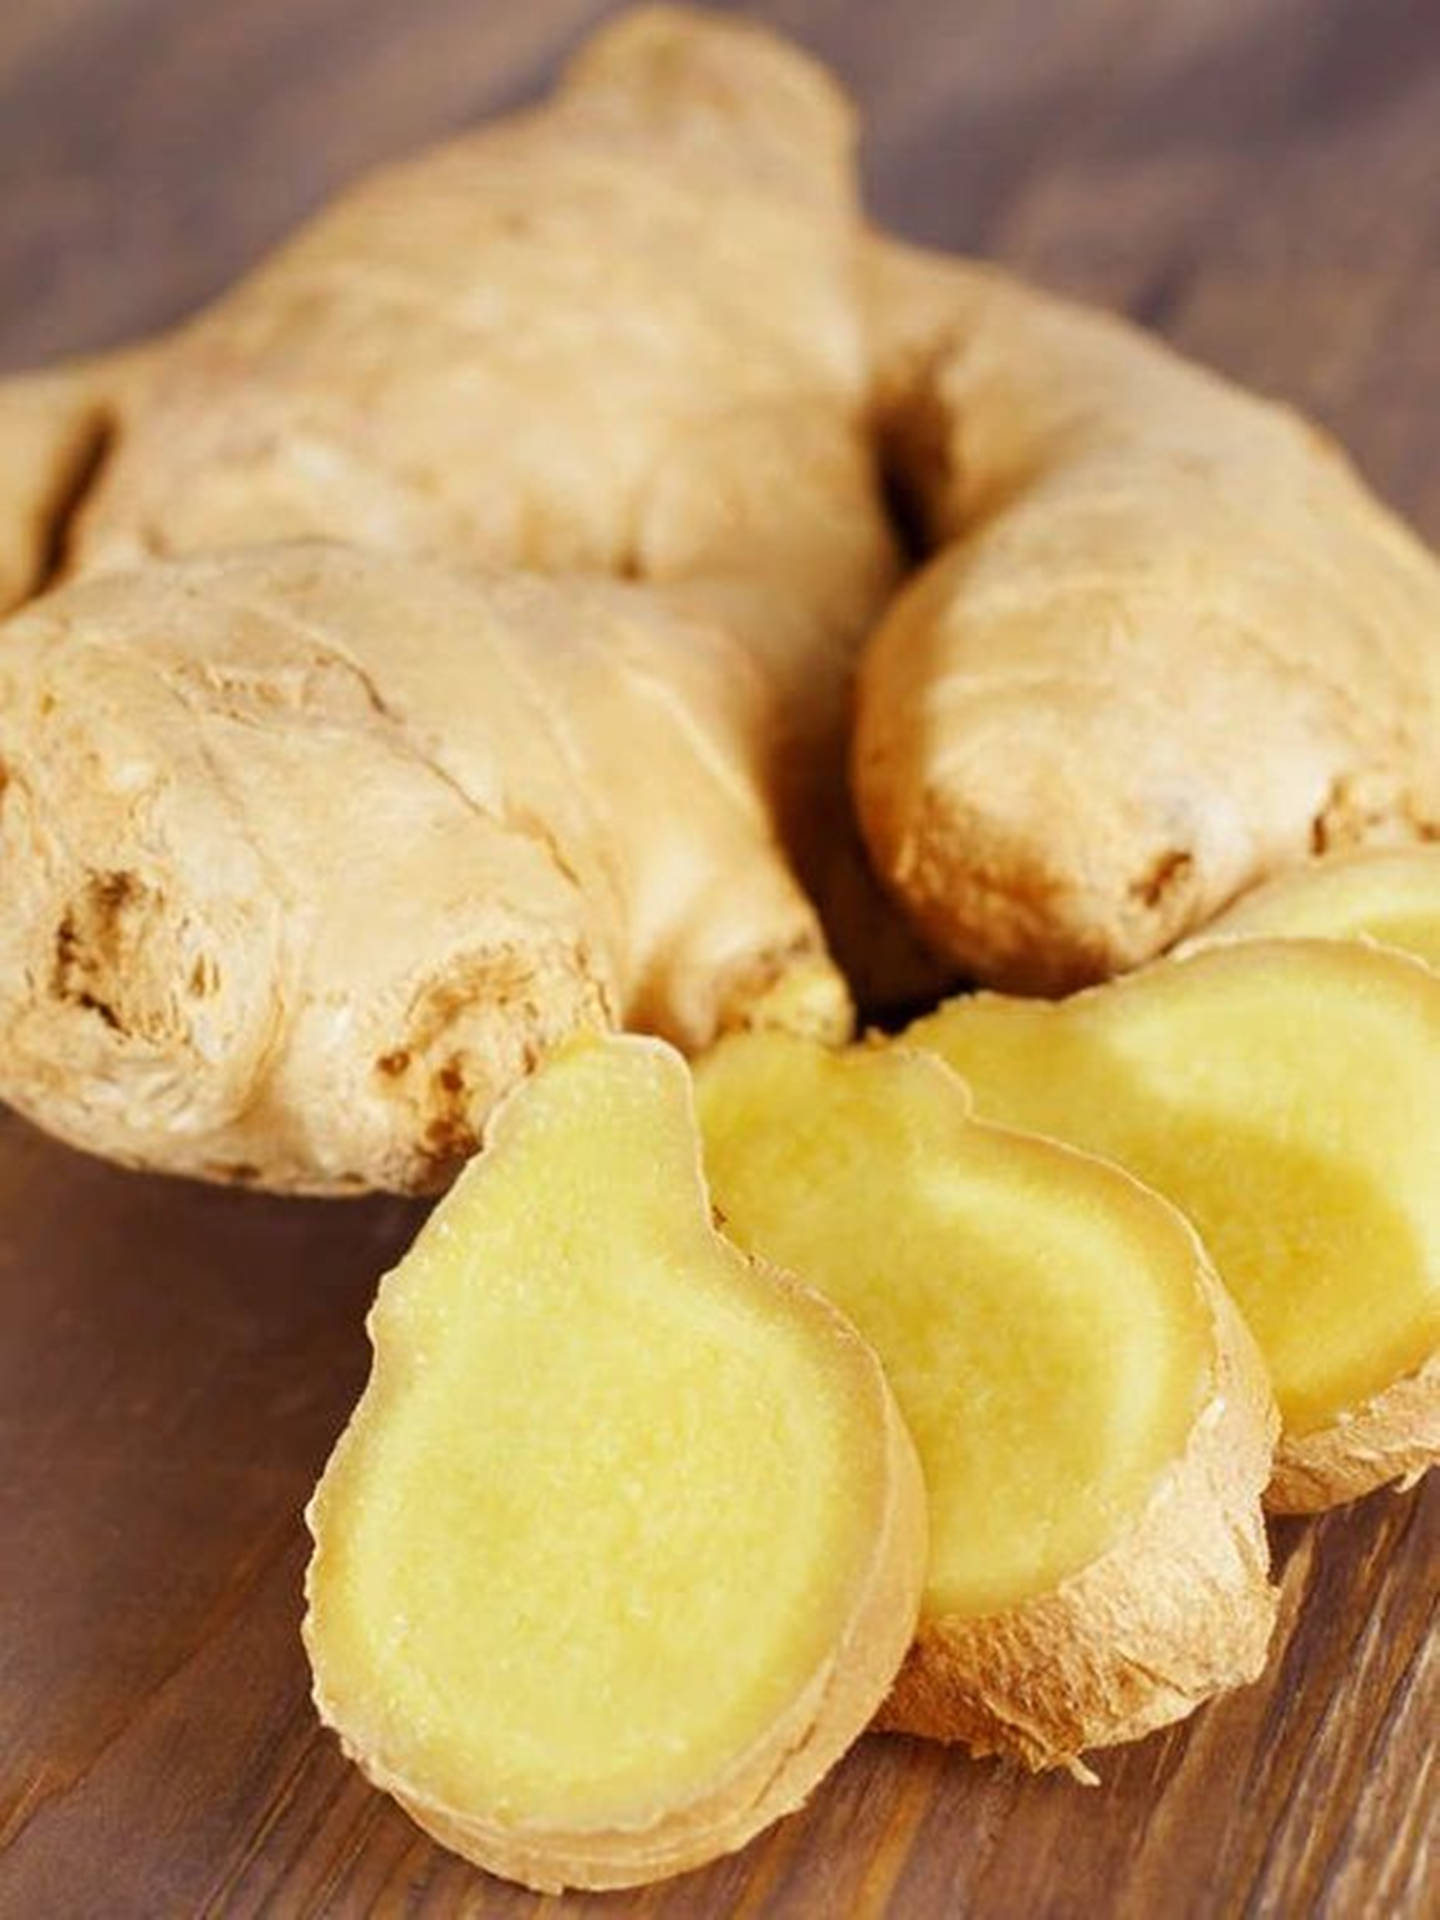 Ginger Root Sliced Extreme Close Up Wallpaper